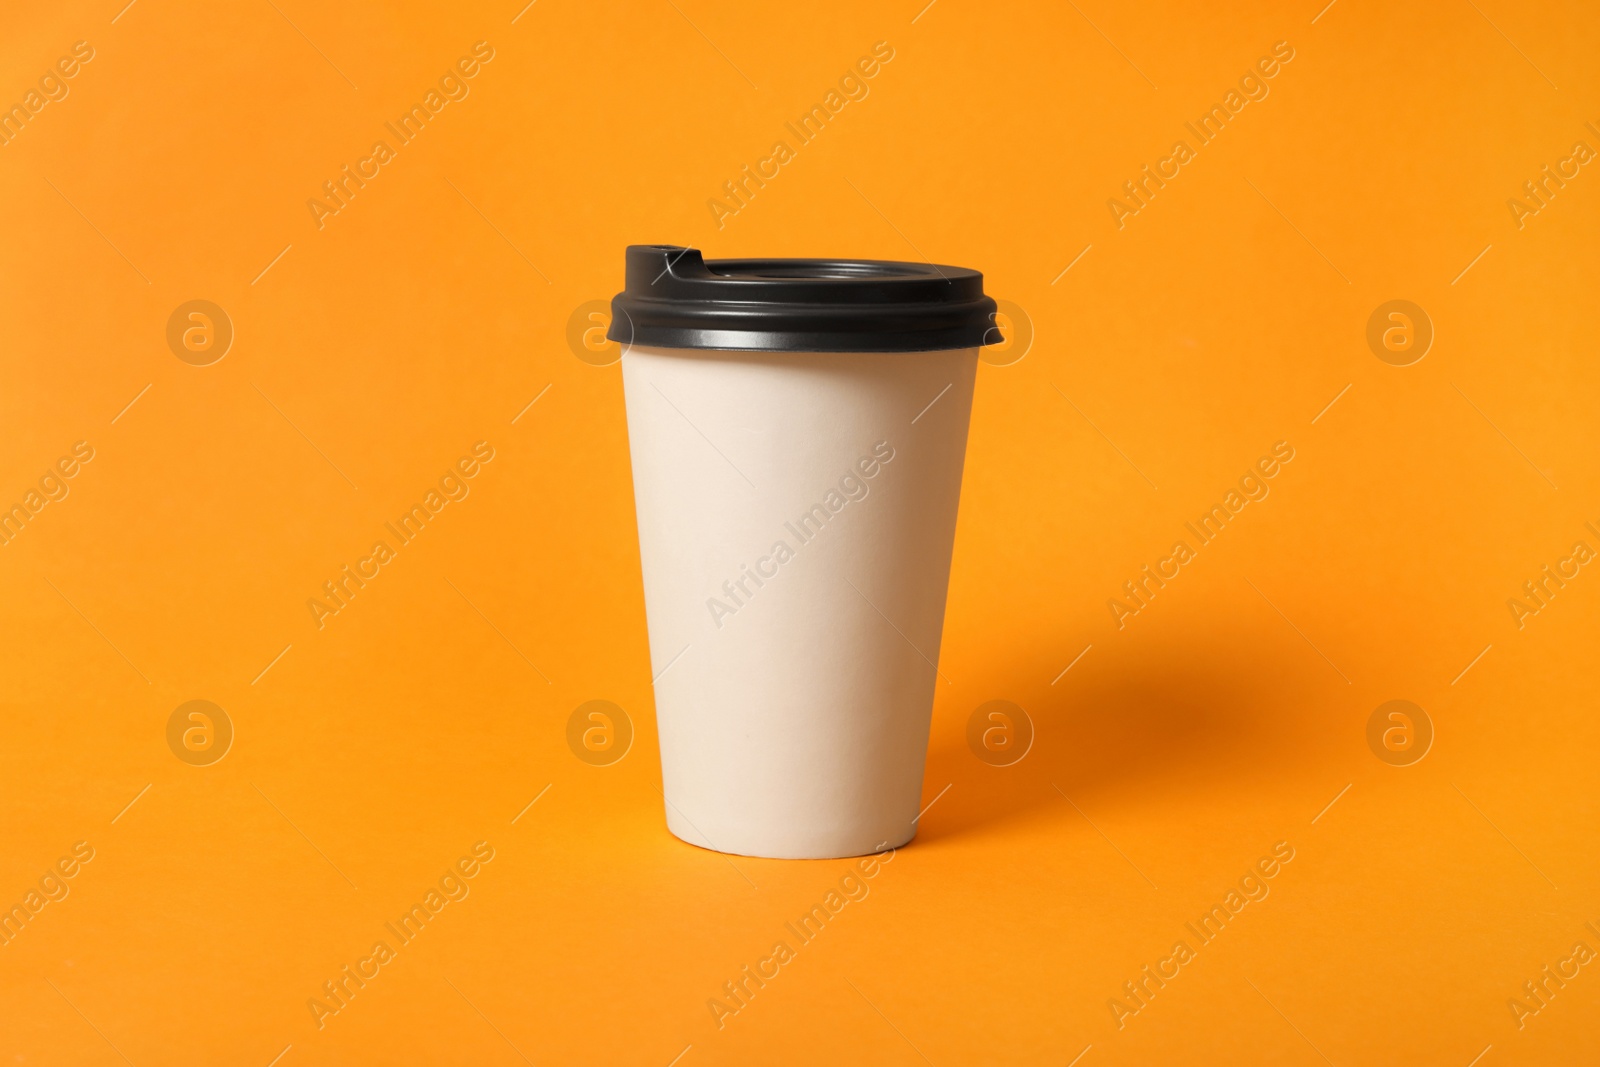 Photo of Takeaway paper coffee cup on orange background